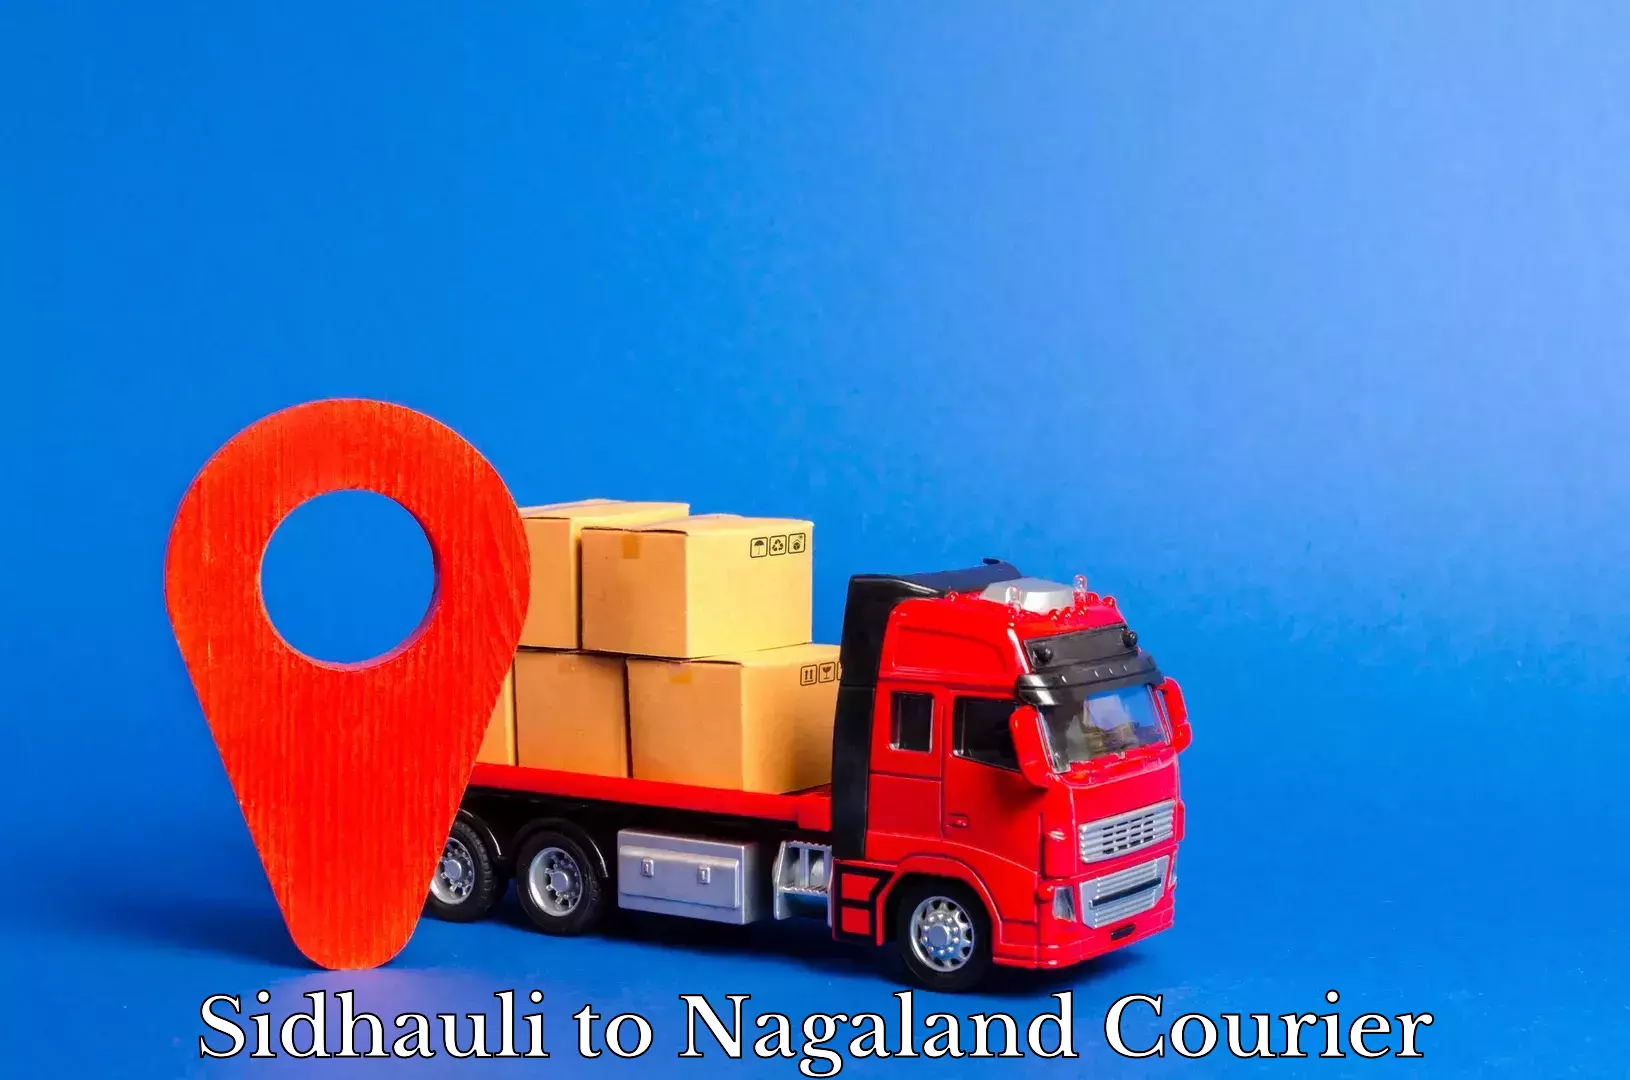 Reliable courier service Sidhauli to Nagaland